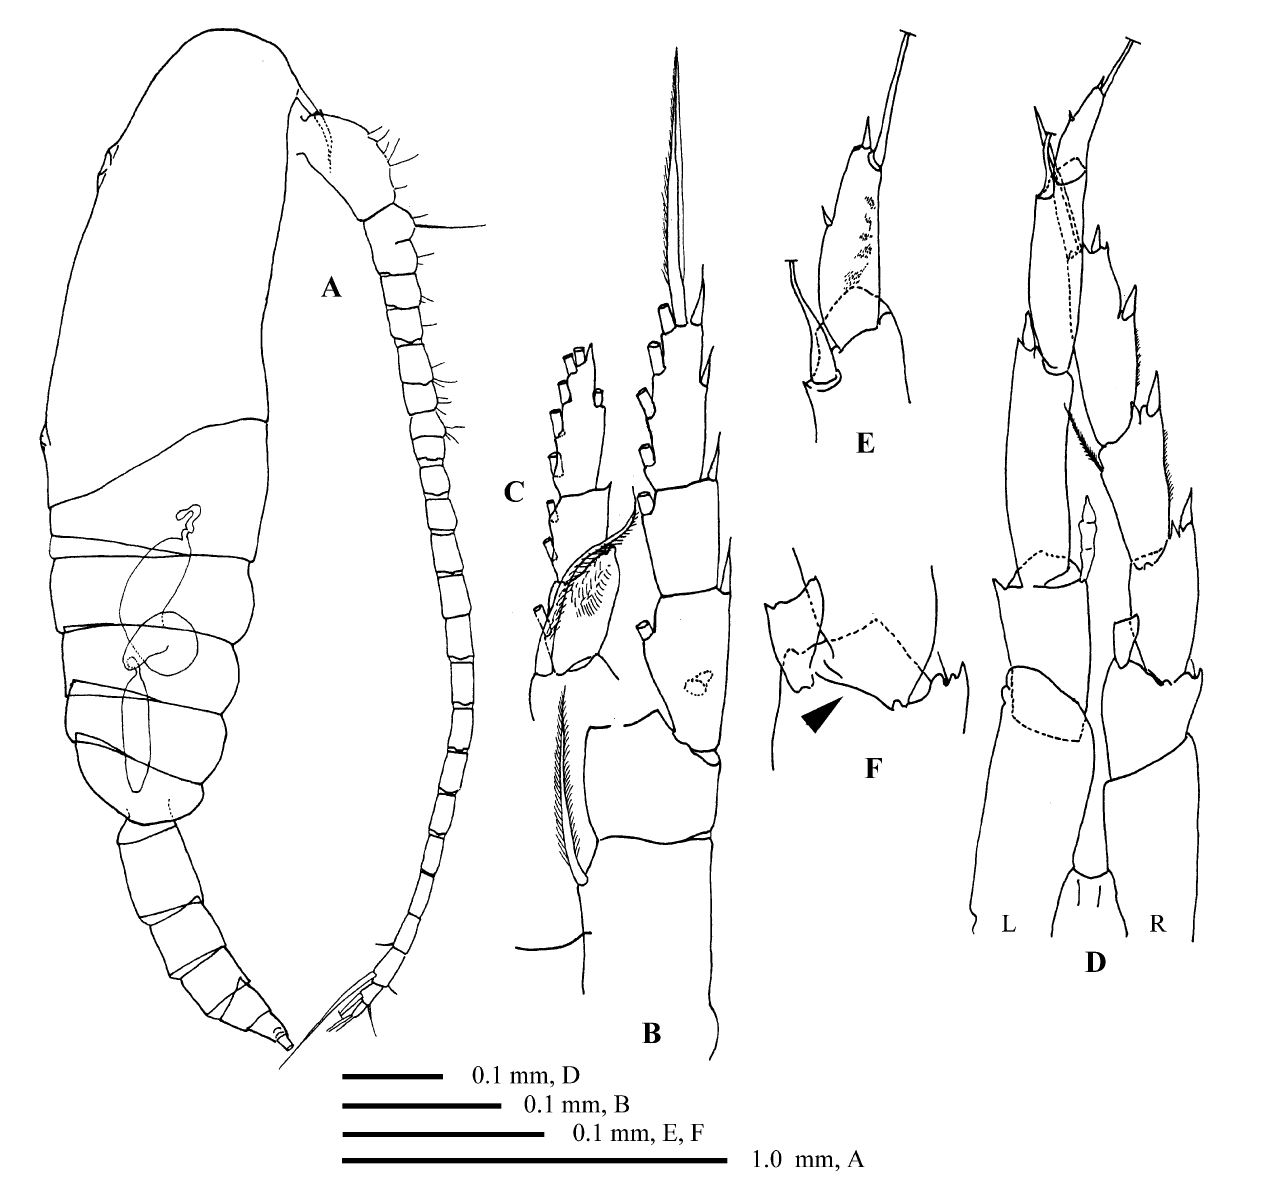 Species Calanoides brevicornis - Plate 3 of morphological figures